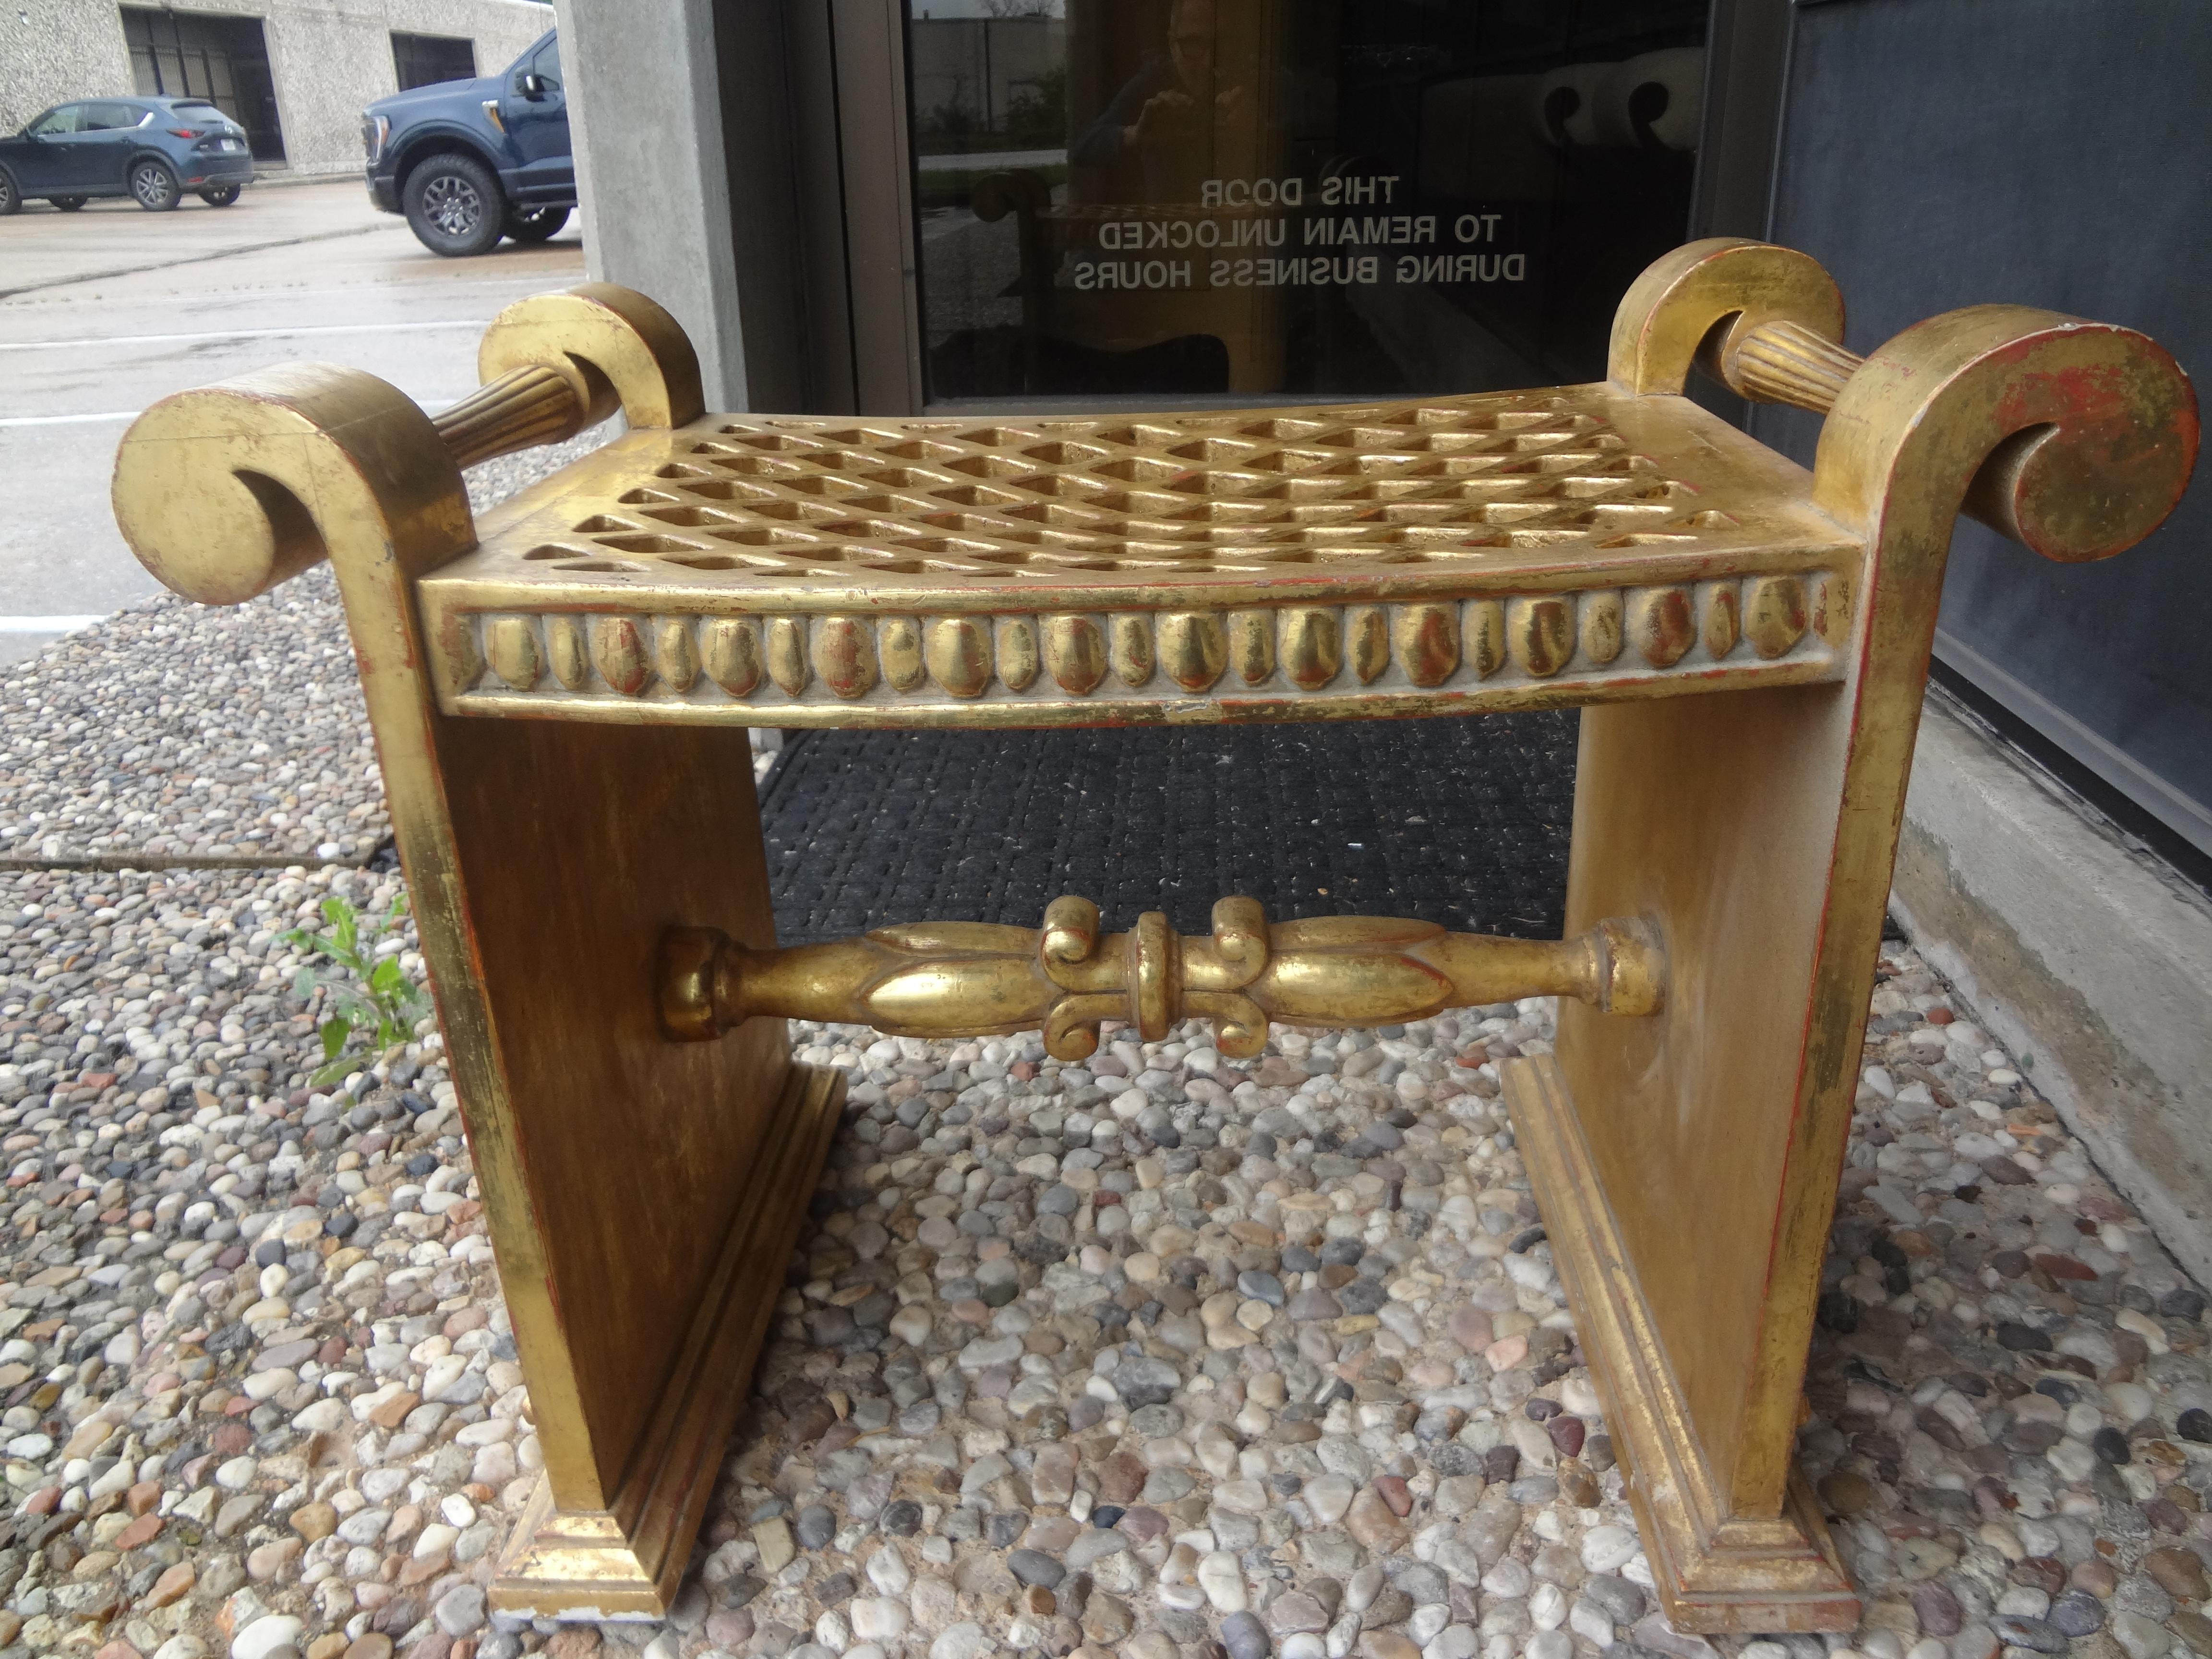 Italian Hollywood Regency giltwood bench.
This versatile midcentury gilt wood bench, stool or ottoman has beautiful gilding and a lattice work seat. Perfect as a vanity bench or wherever extra seating is needed. A cushion could be easily added if